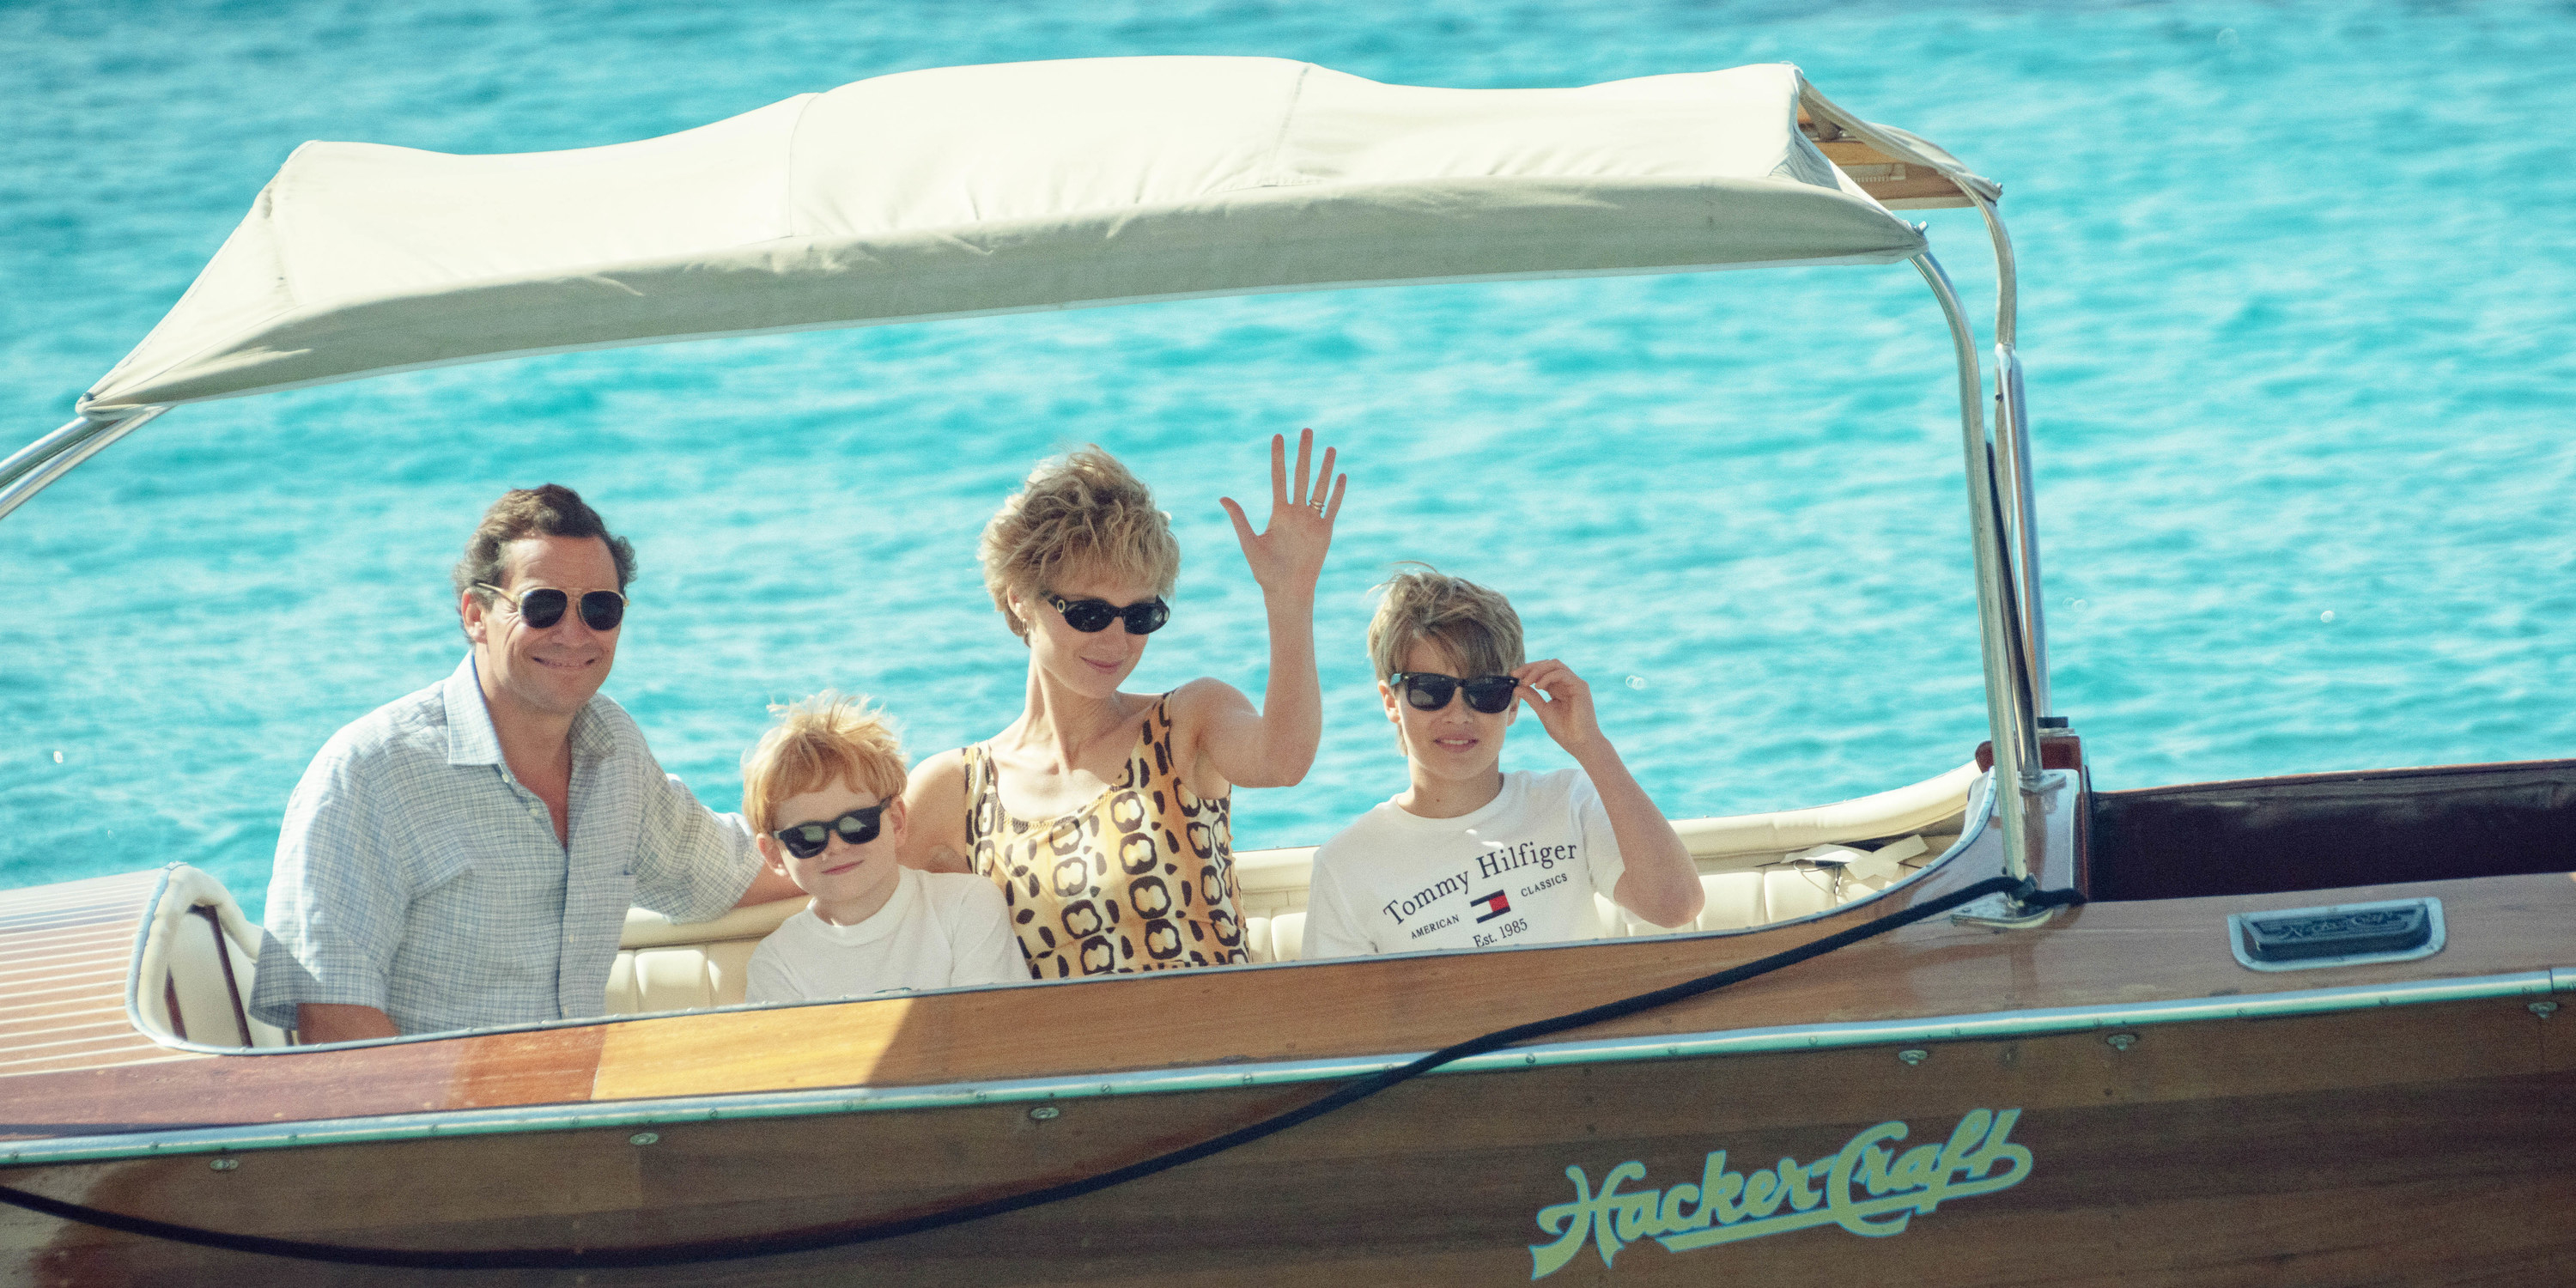 Charles, Diana, Harry, and William in a boat